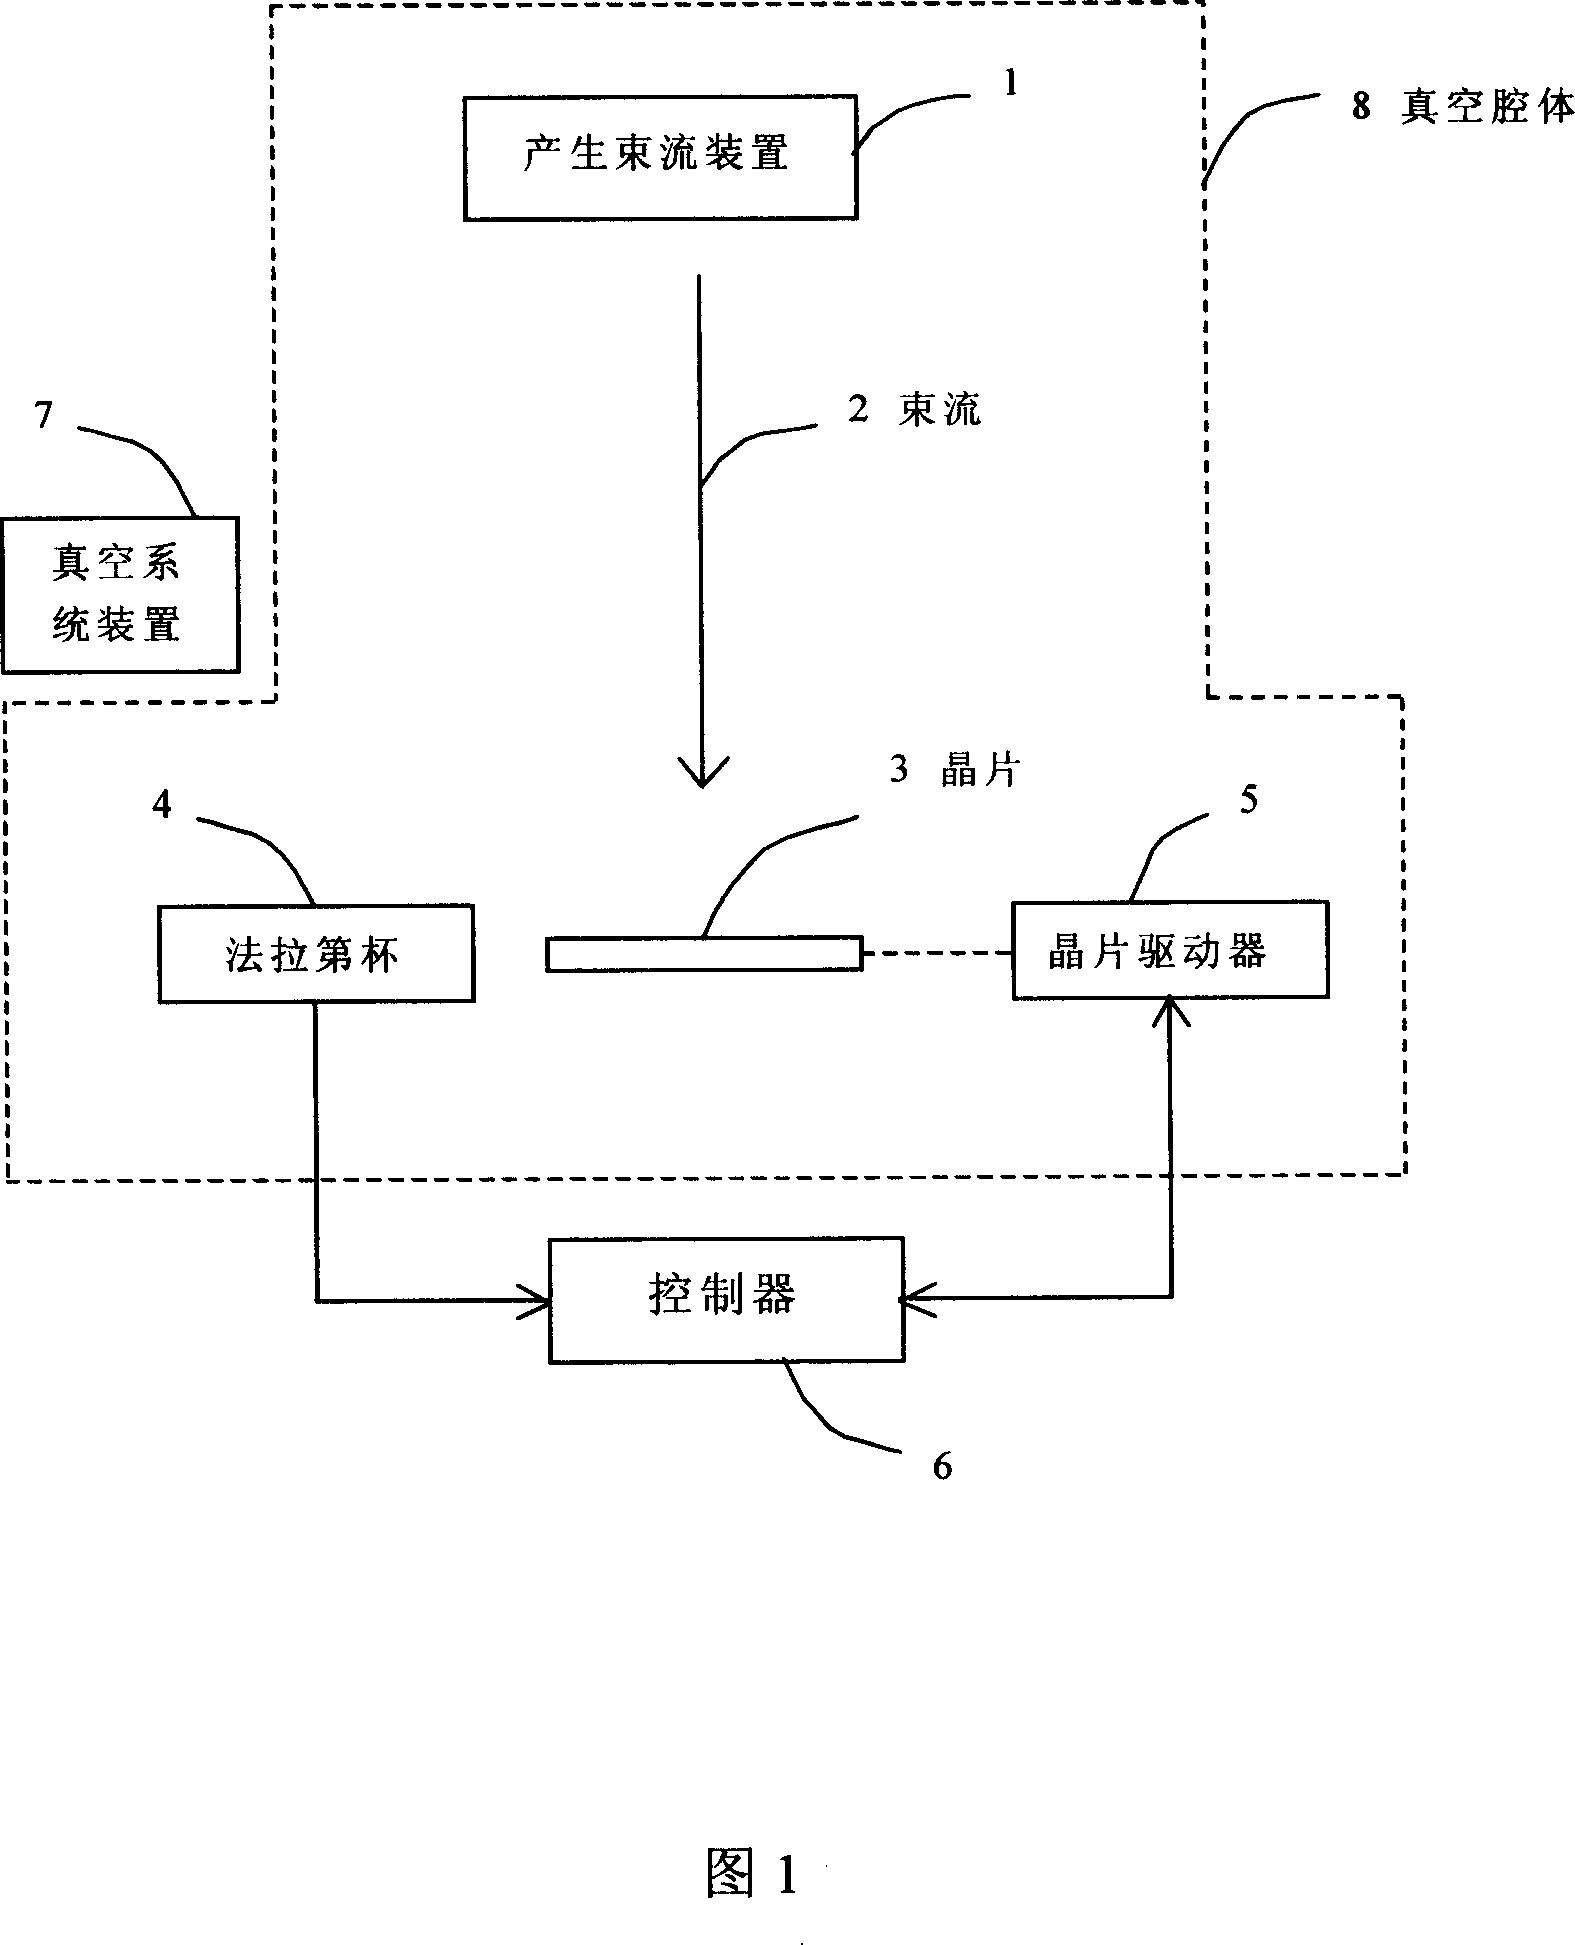 Method and device for controlling ion implantation